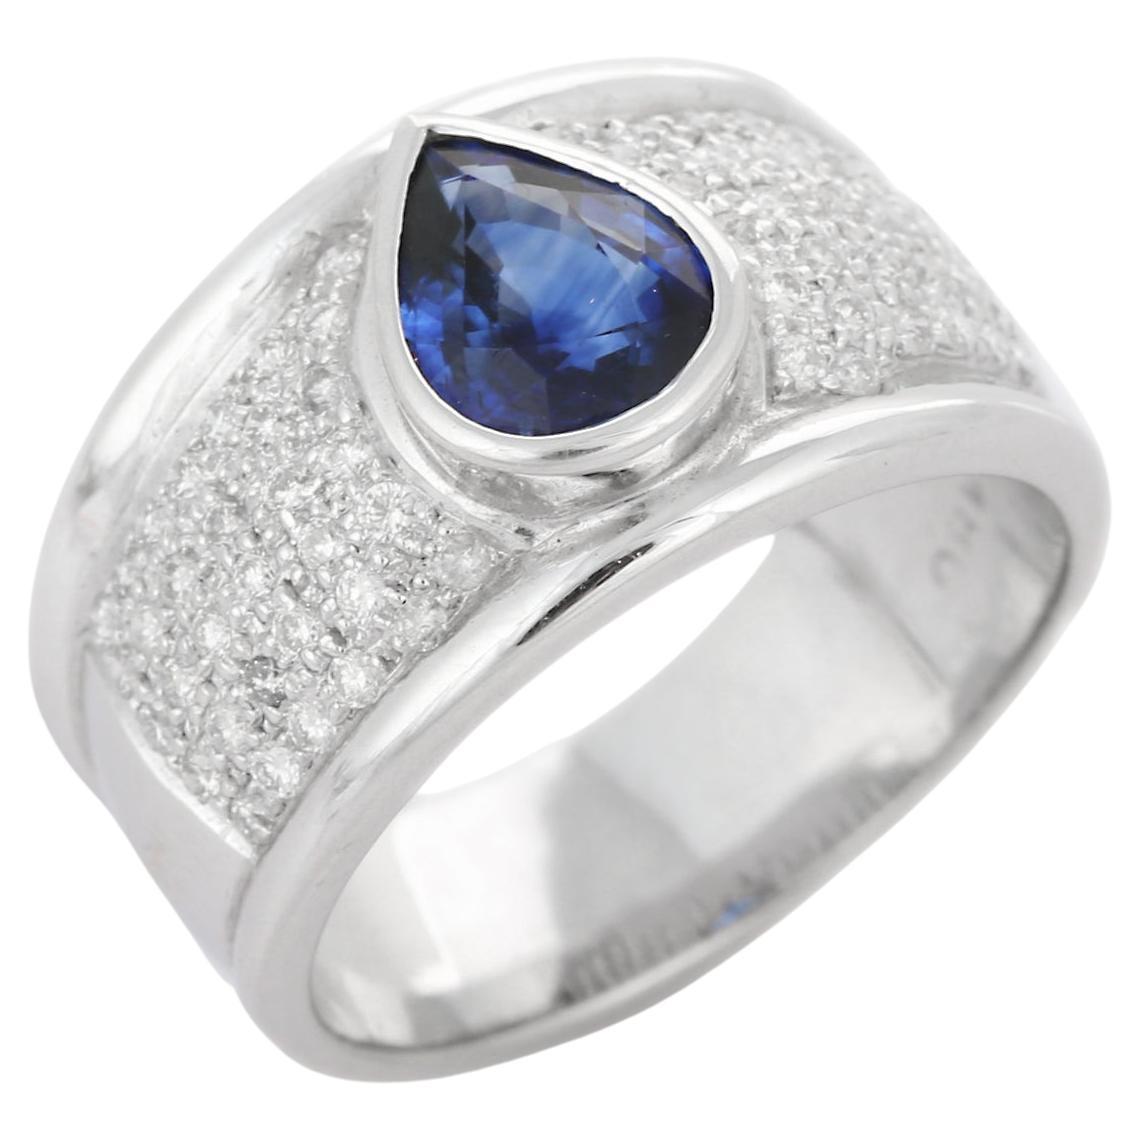 For Sale:  Glamarous 2.1 Ct Blue Sapphire Cocktail Ring in 18K White Gold with Diamonds